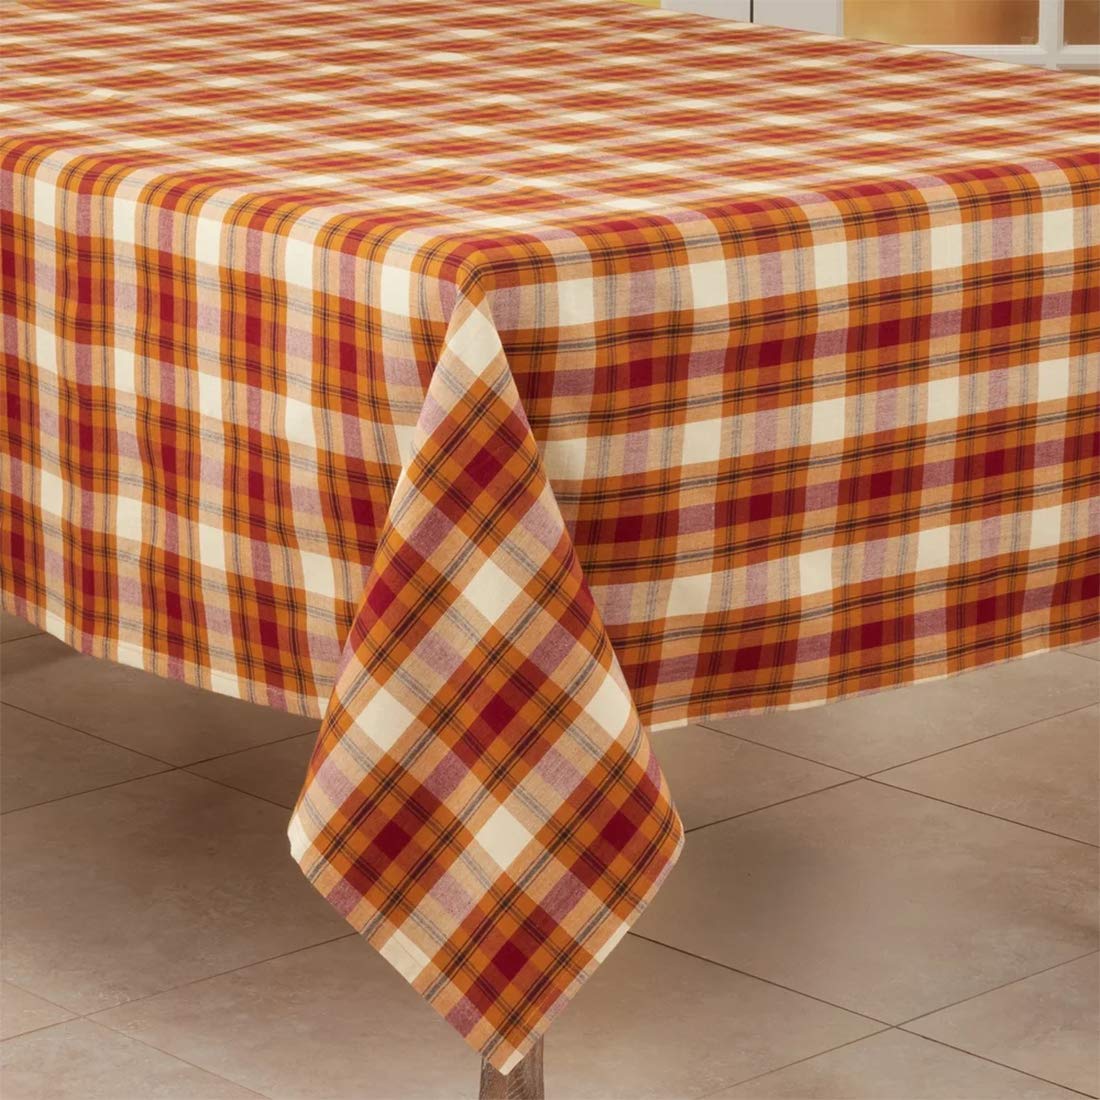 Fennco Styles Harvest Plaid Design 100% Cotton Tablecloth 70" W x 70" L - Autumn Rust Table Cover for Home, Dining Table Decor, Banquet, Thanksgiving and Special Event